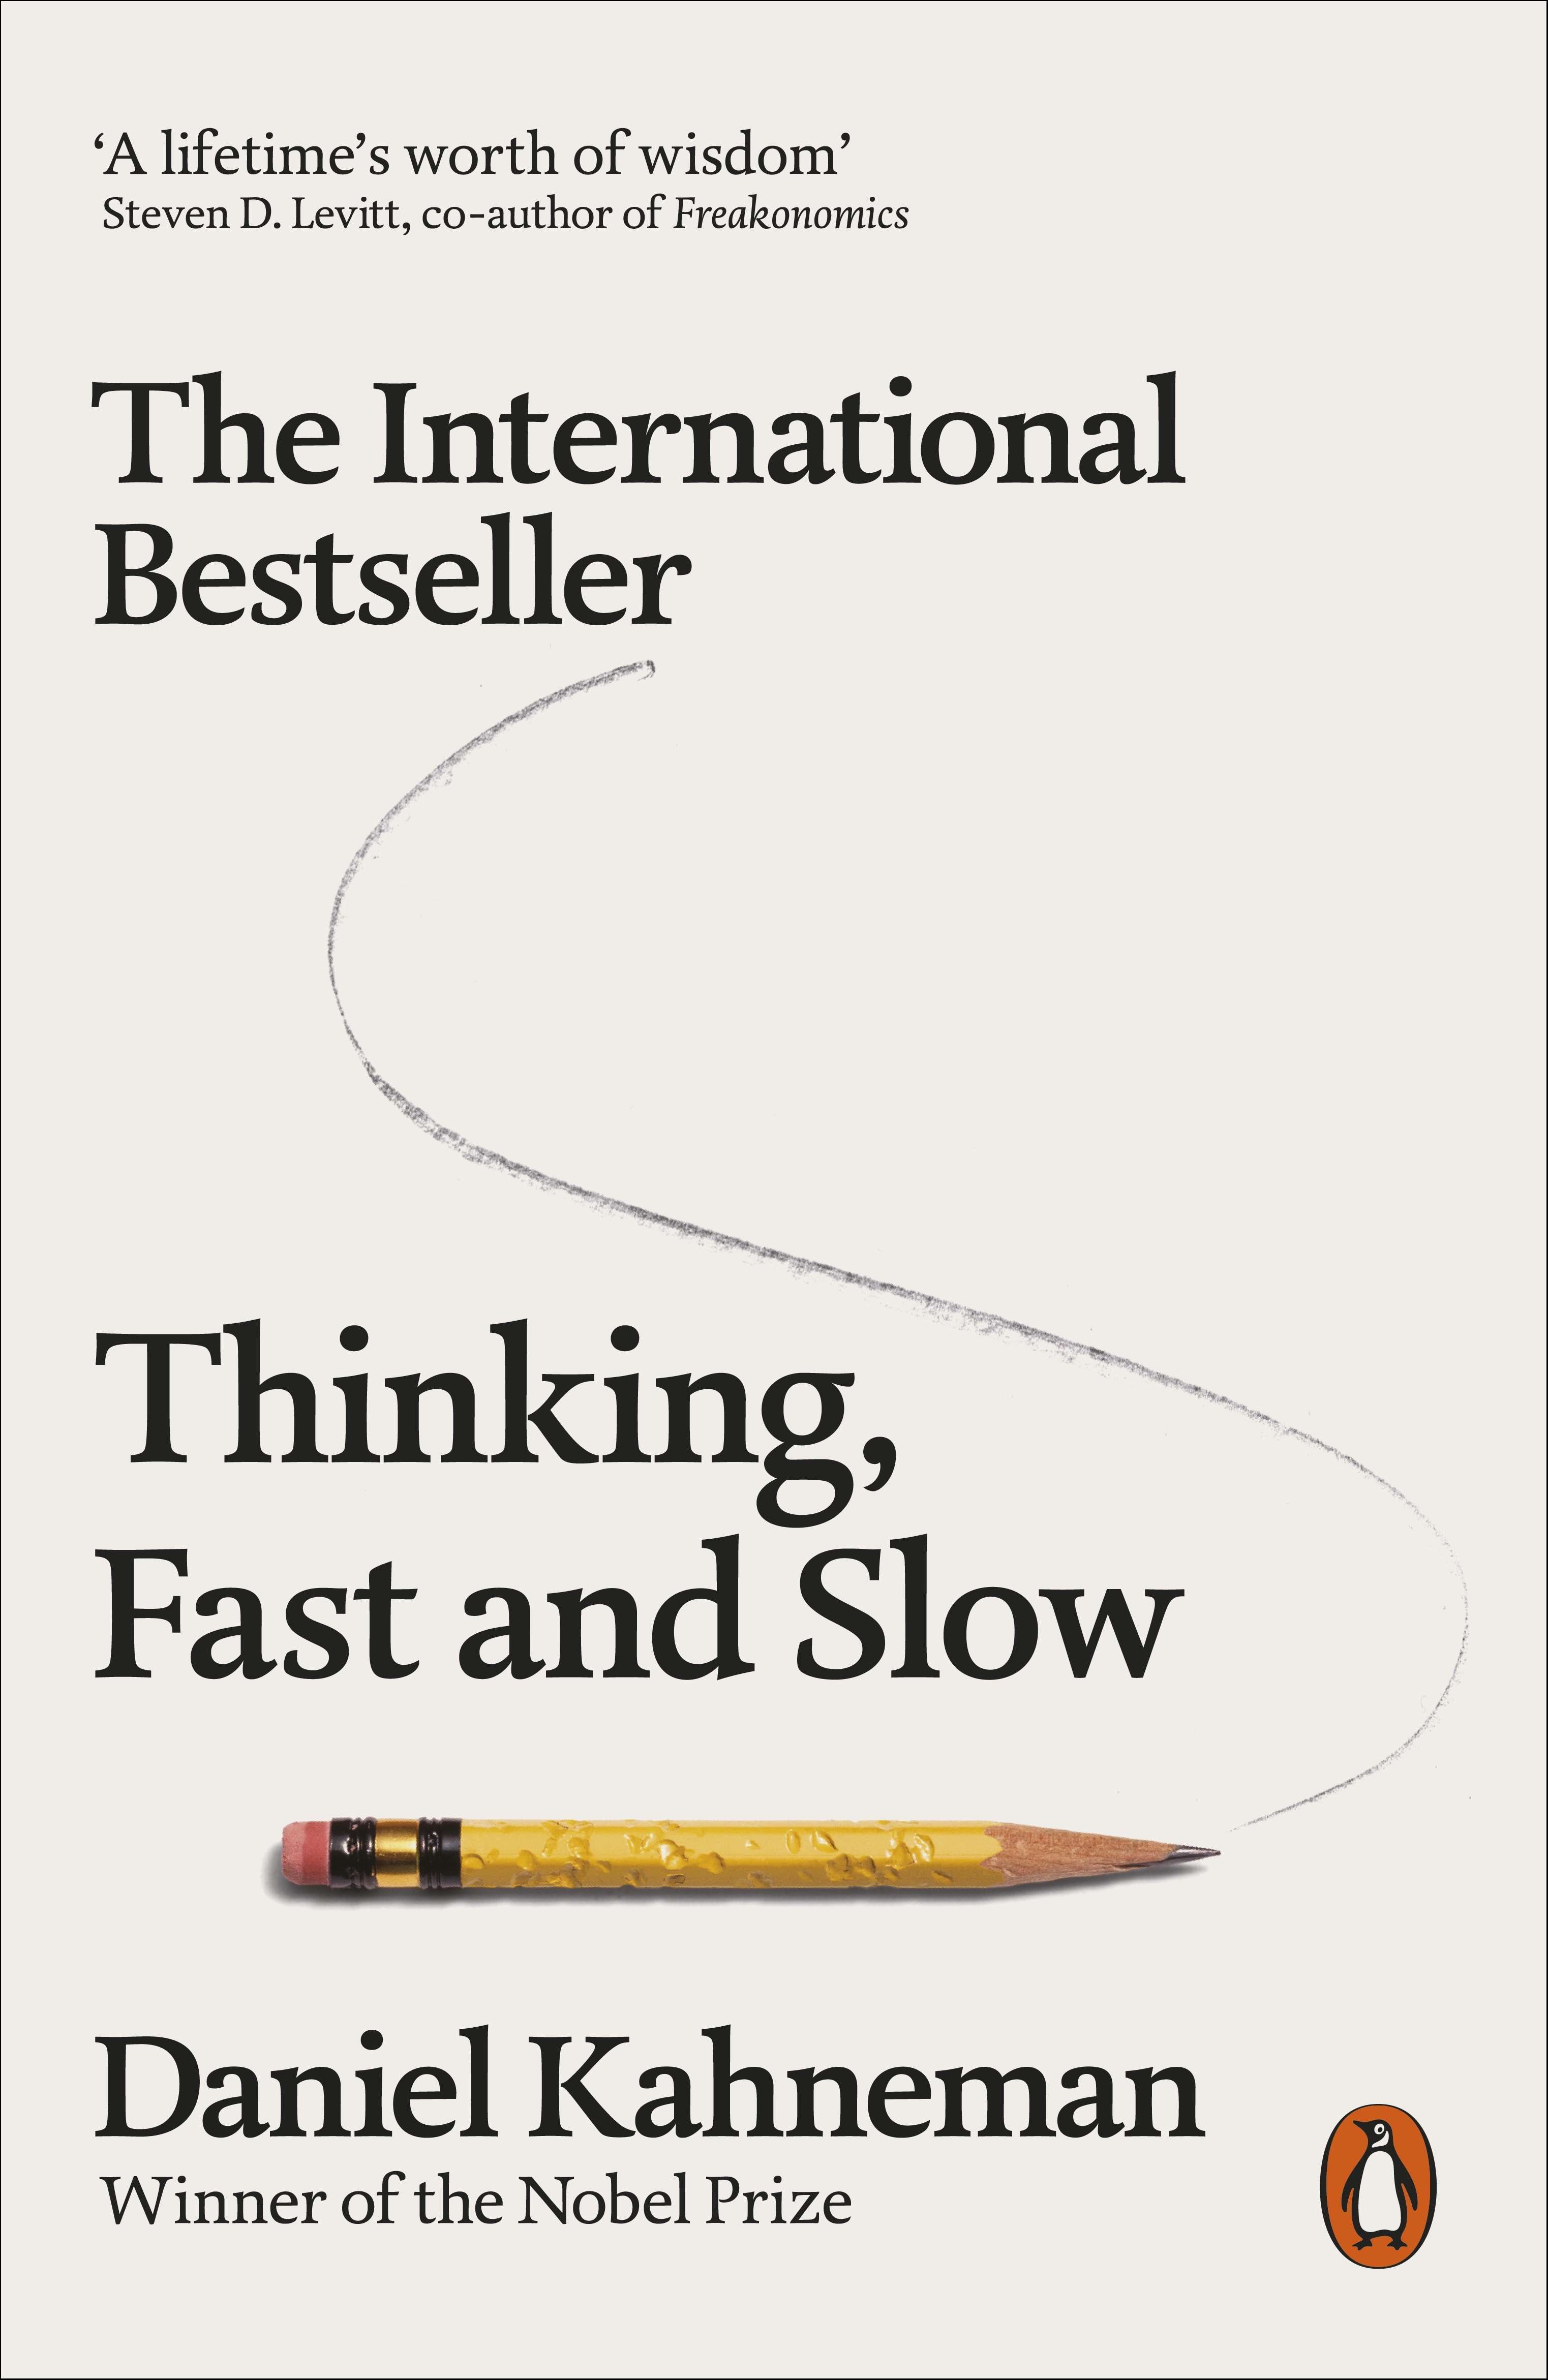 Make Better Decisions. Thinking, Fast and Slow by Daniel Kahneman